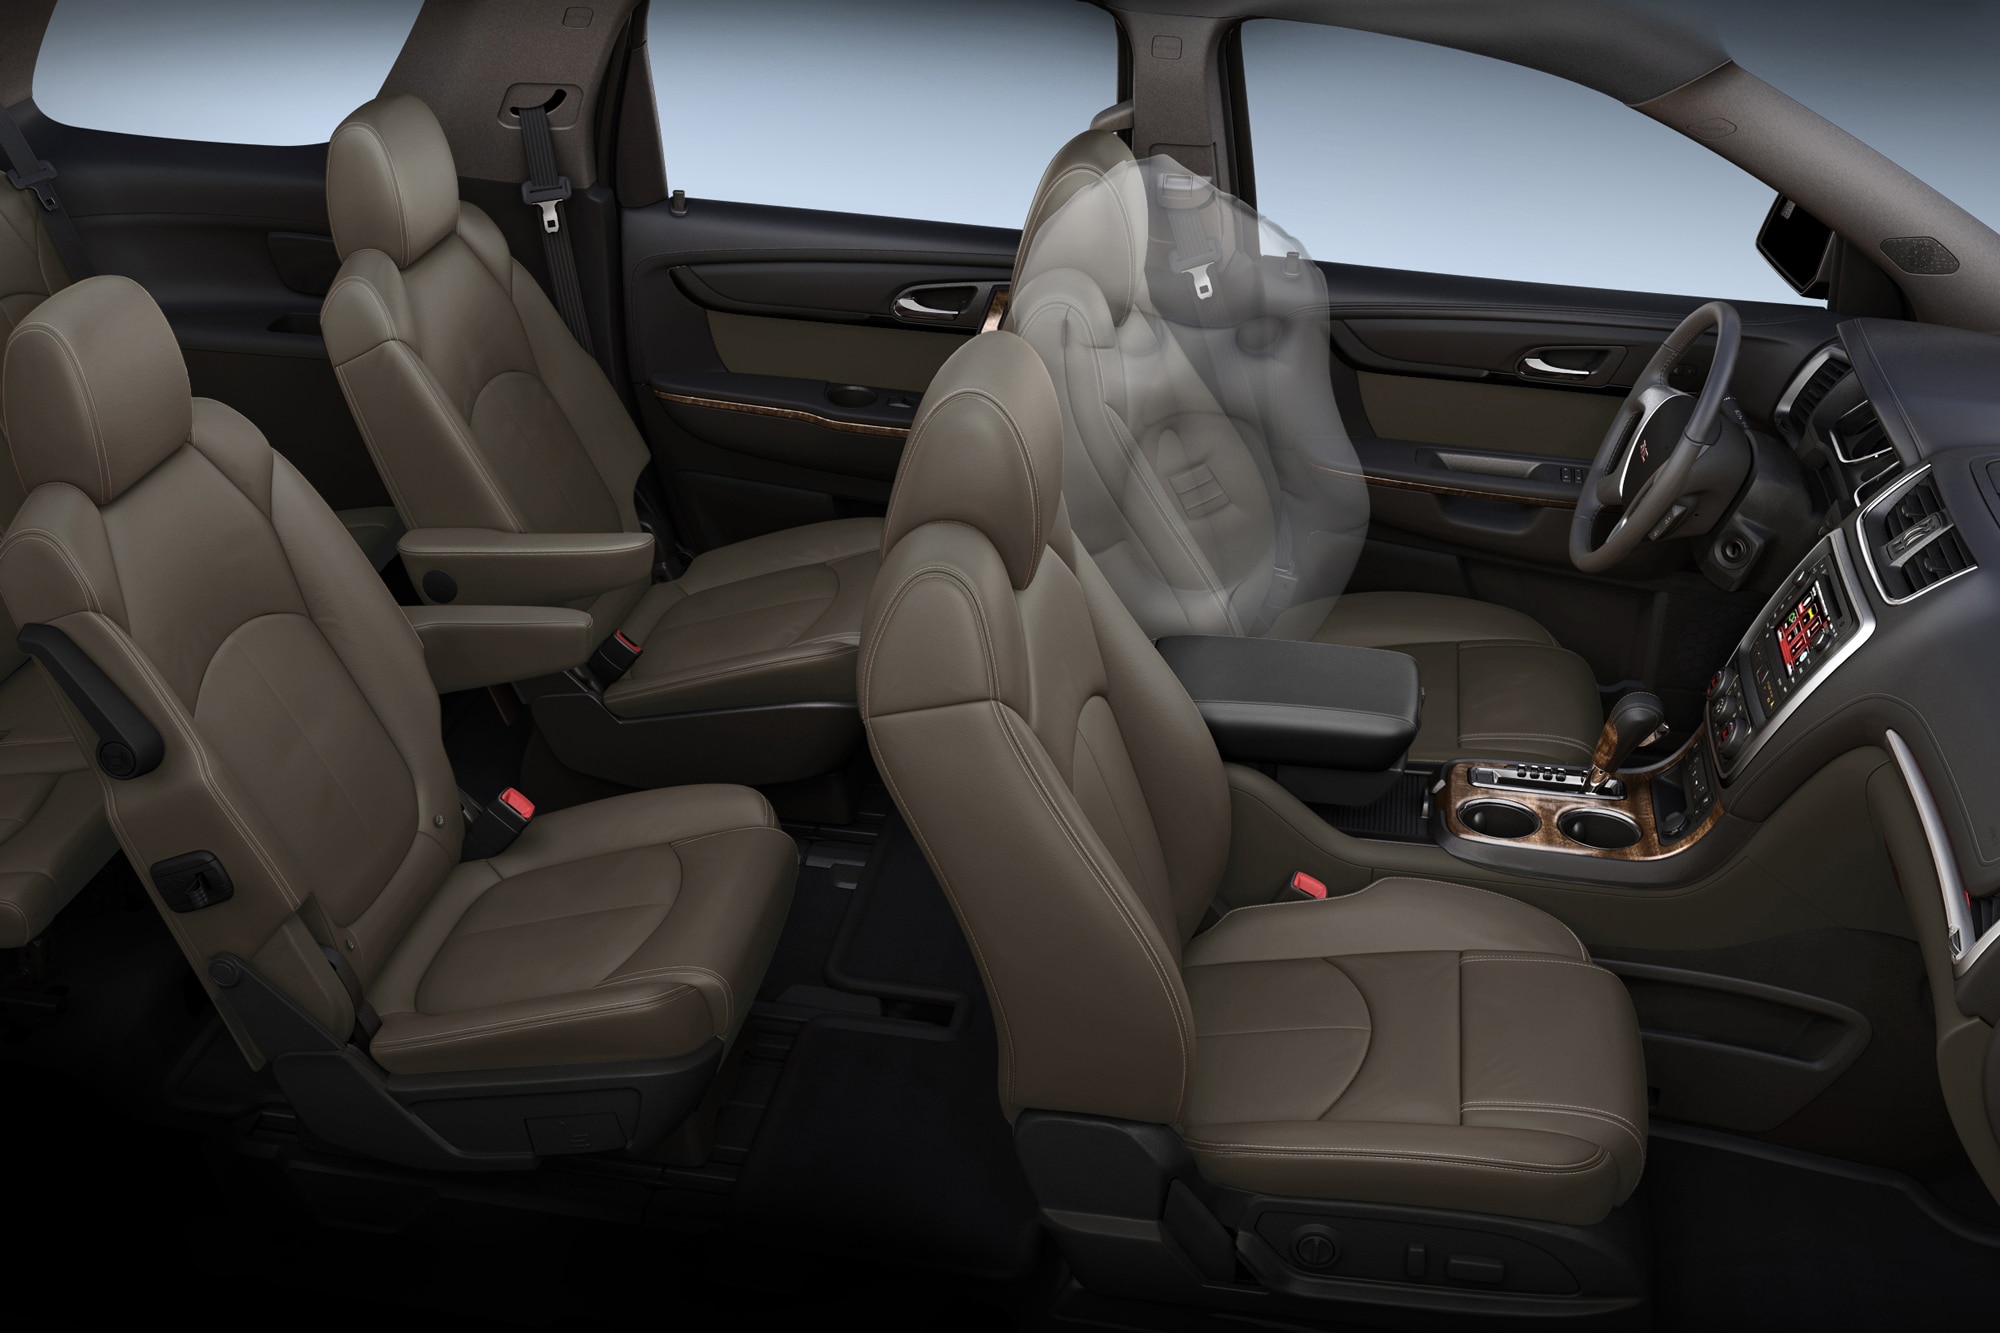 2015 GMC Acadia airbags illustrated in 7-seater interior